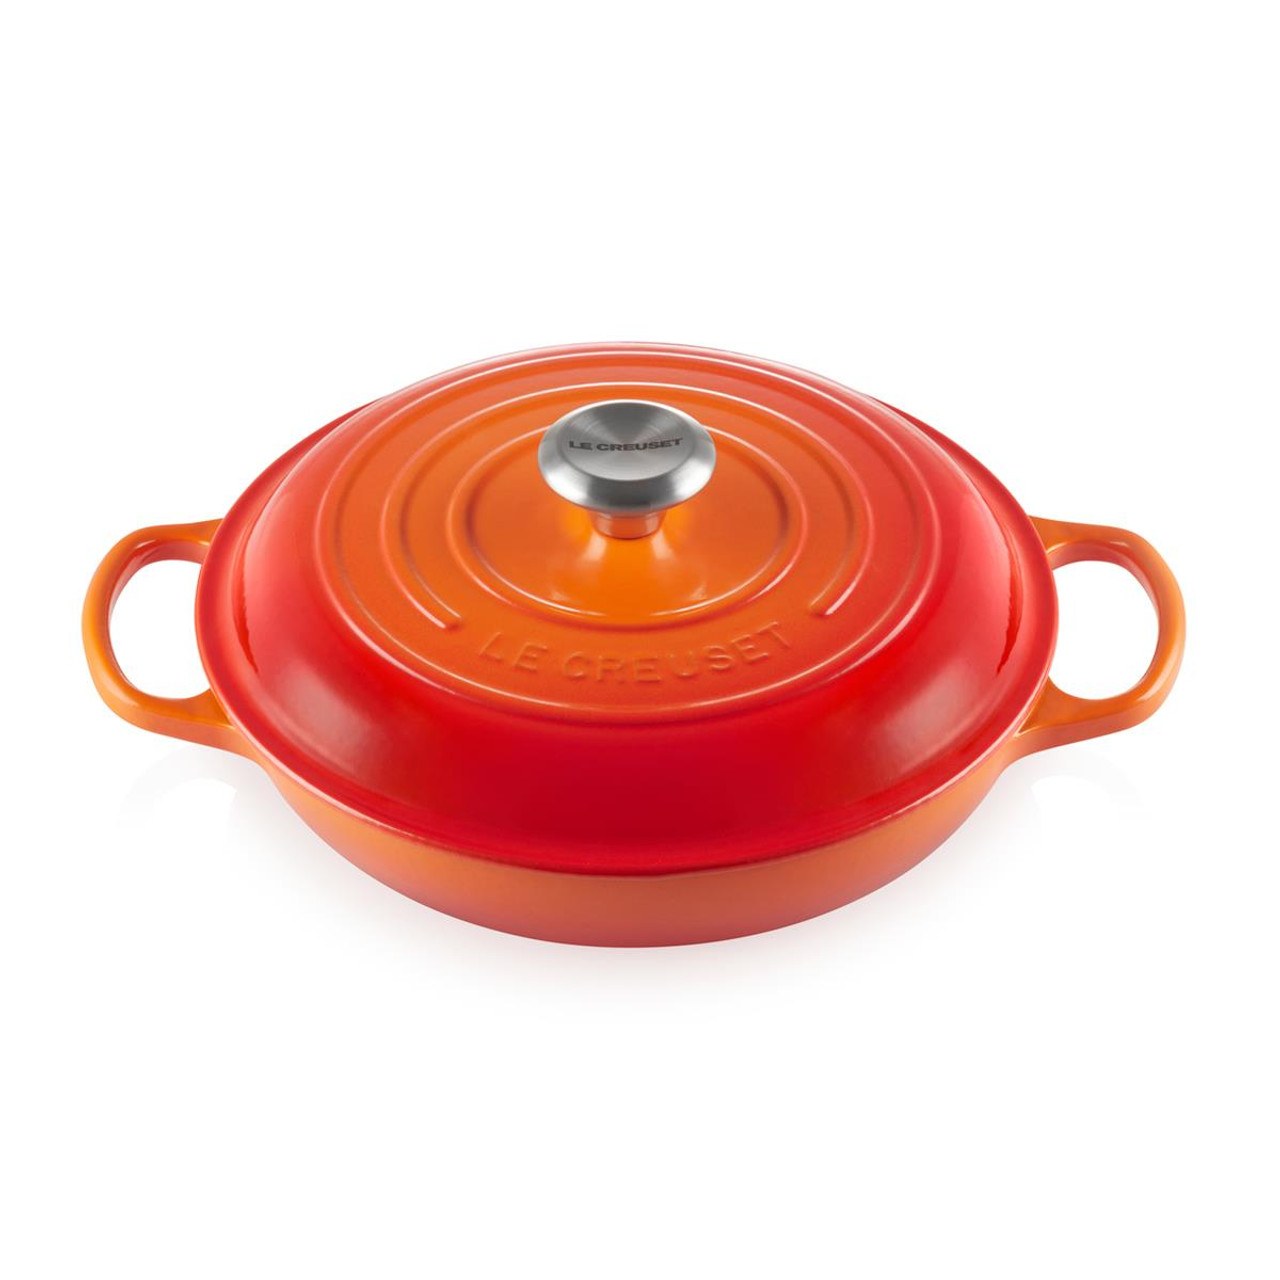 Does the Le Creuset shallow casserole only come in one size?